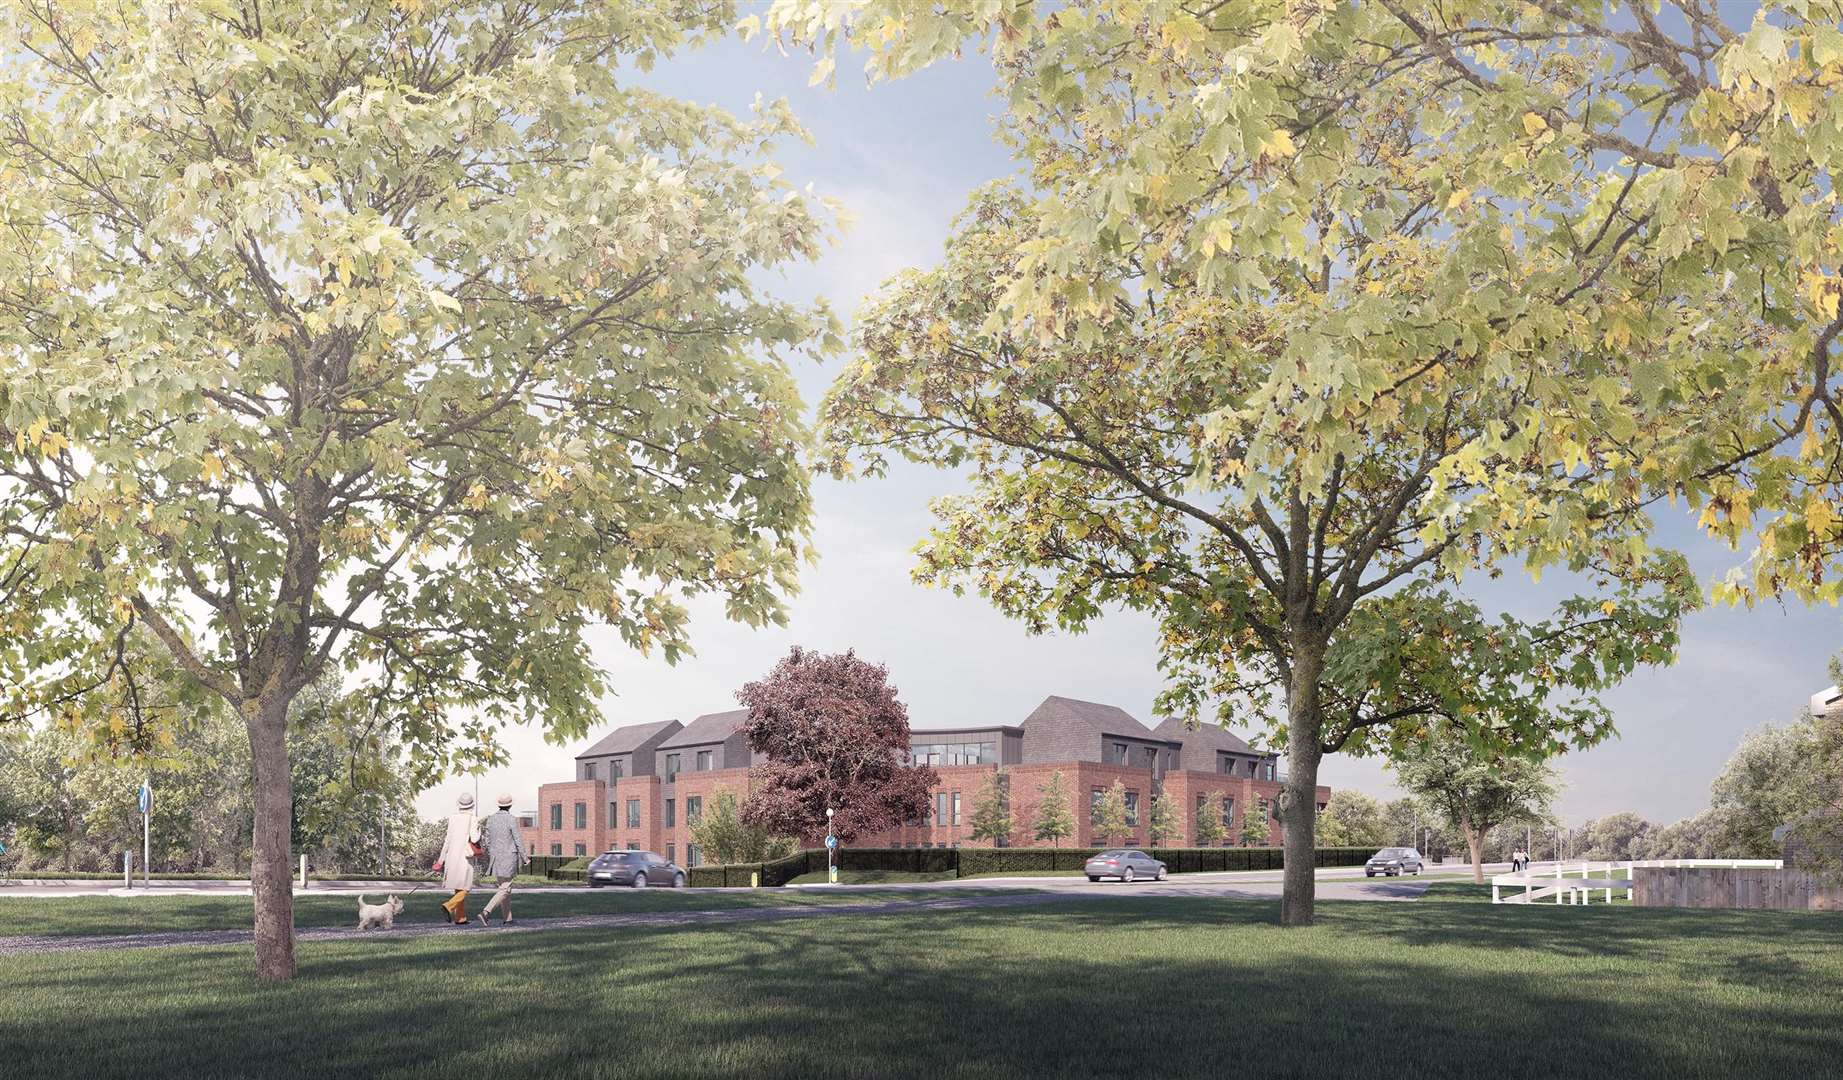 The care home will have 75 beds. Picture: Frontier Estates